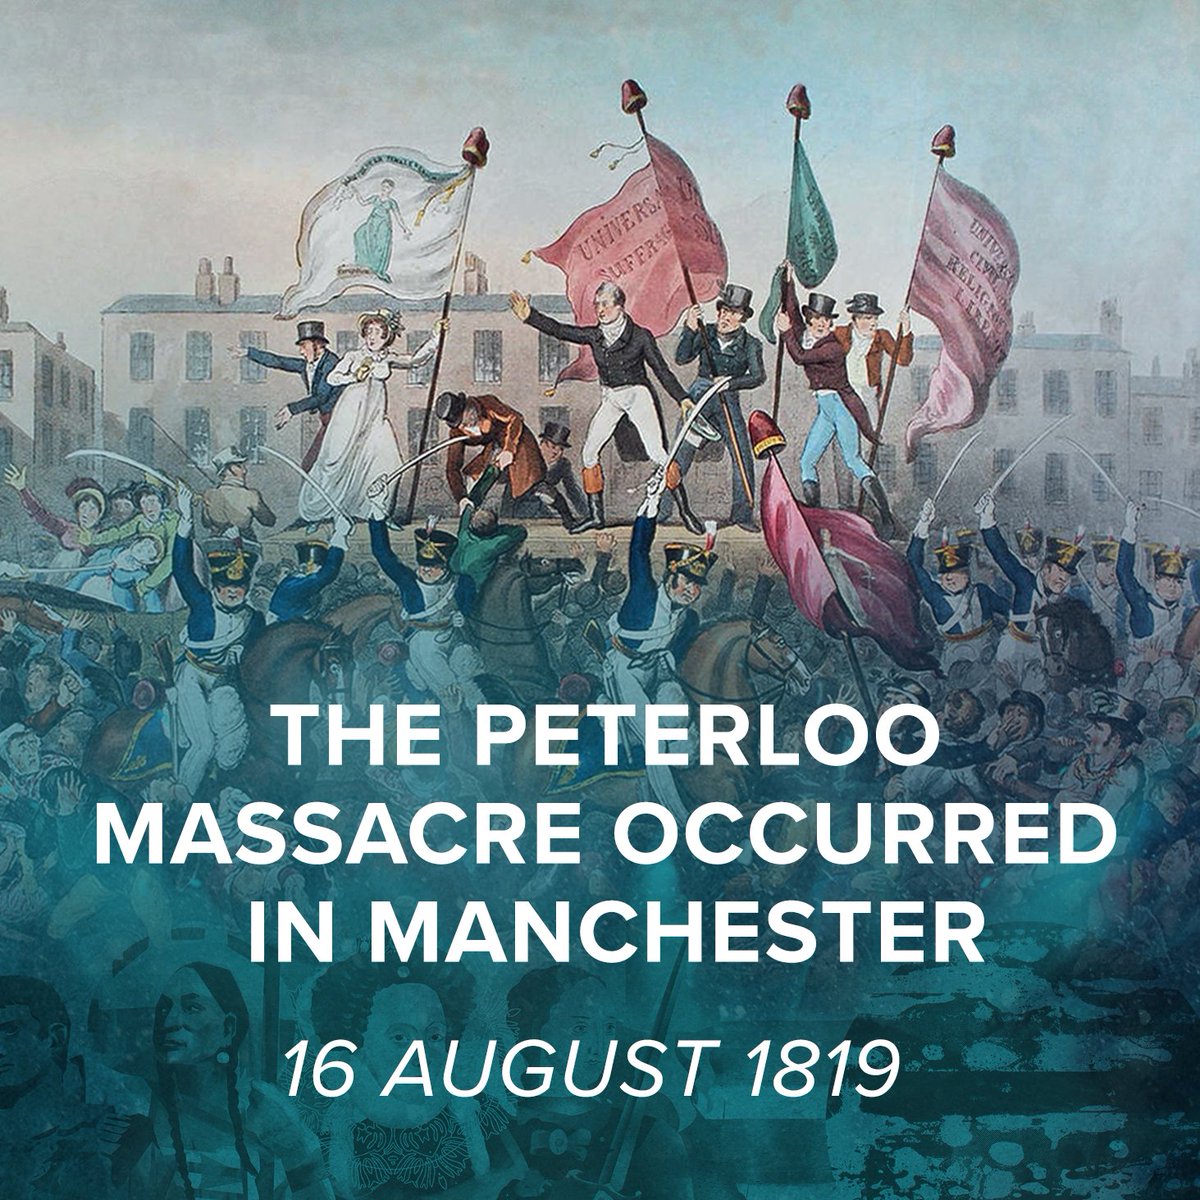 On 16 August 1819, the Peterloo Massacre took place in Manchester, resulting in the deaths of an estimated 18 & the serious injury of over 600. Thousands had gathered to peacefully protest the British system of representation & were attacked by troops ordered to disperse them.